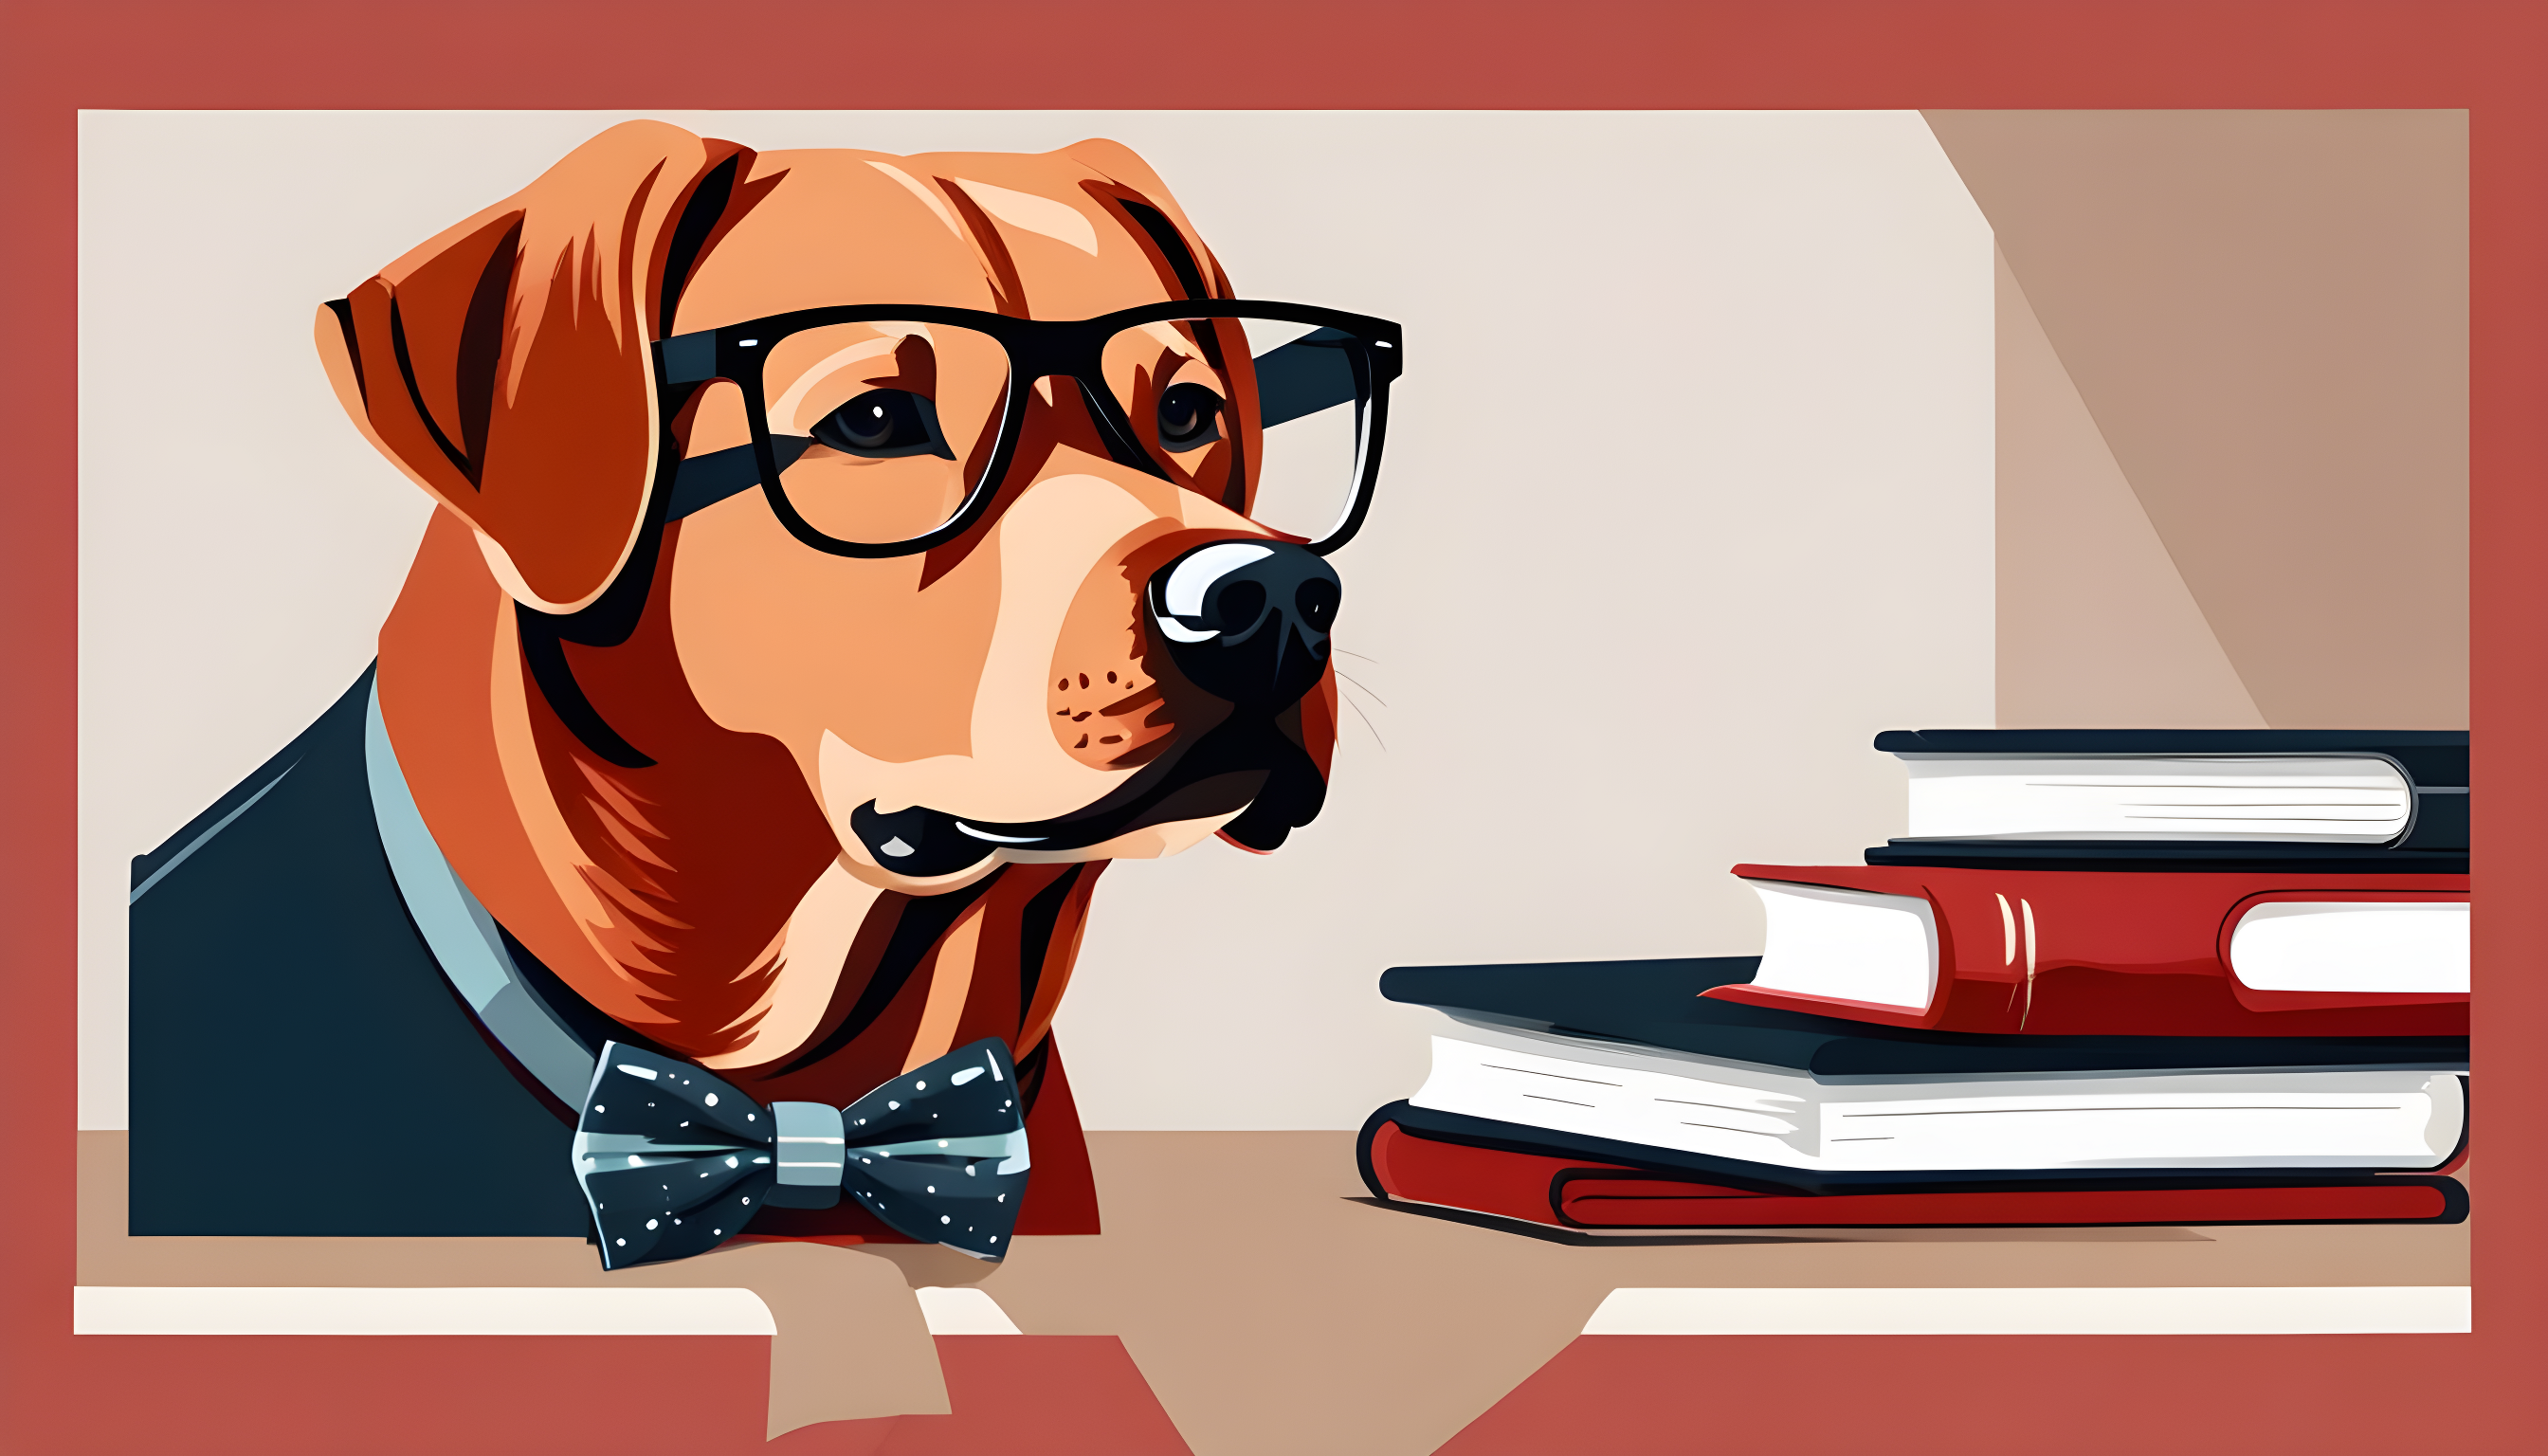 A Red Labrador in nerdy glasses and a bowtie, all set to drop some serious knowledge bombs on your FAQs about Red Labradors.